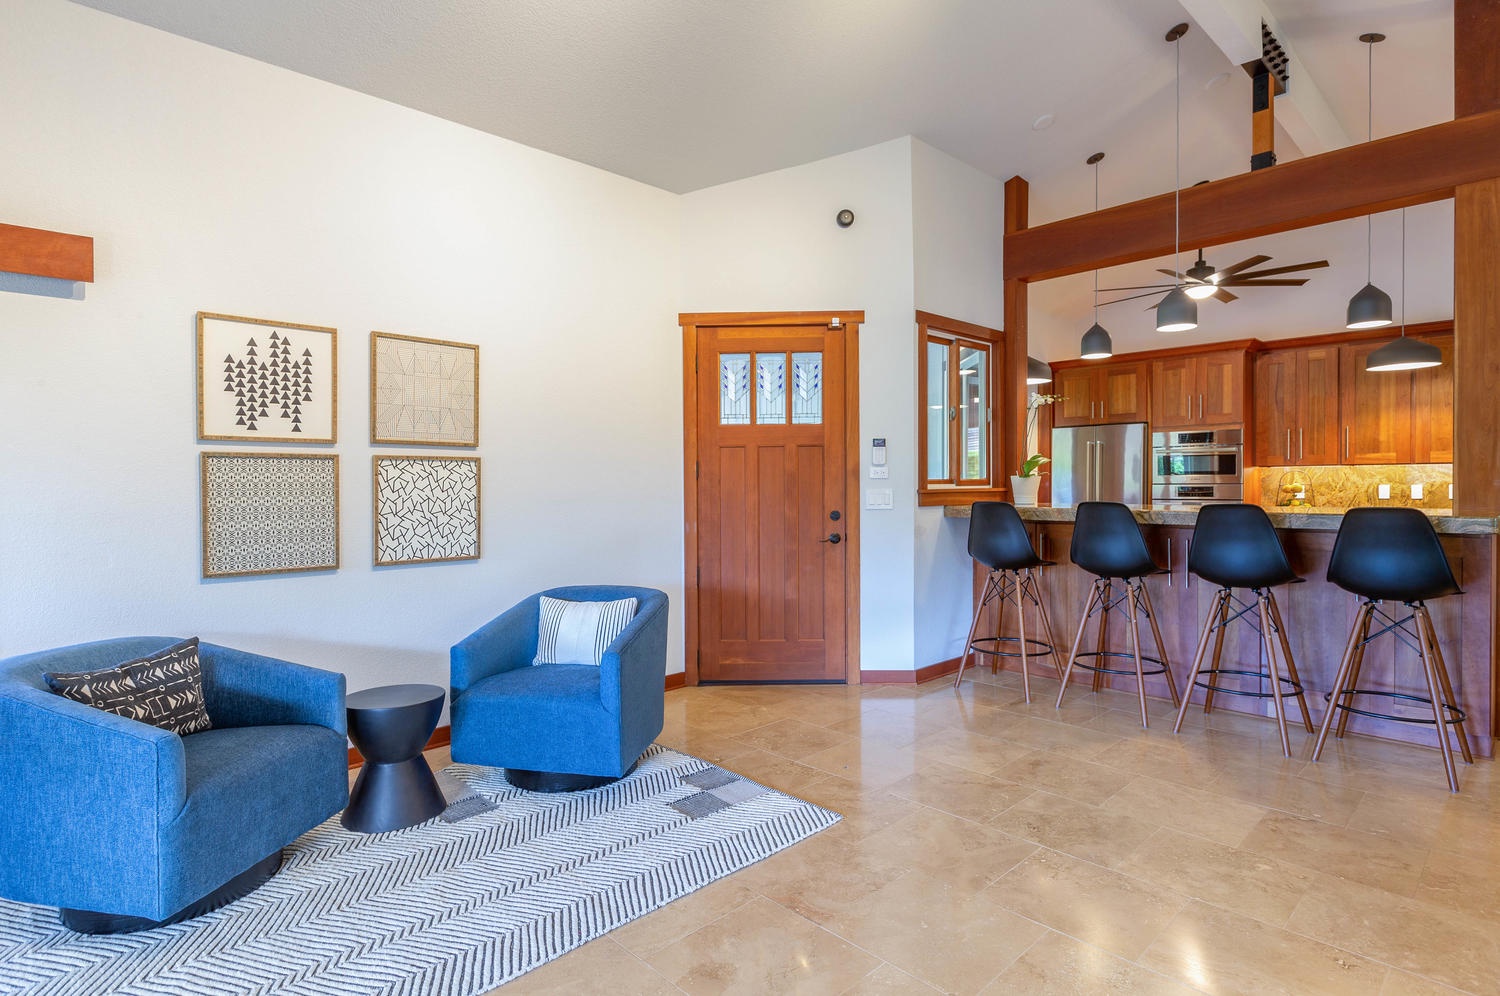 Princeville Vacation Rentals, Makana Lei - Another inviting seating area